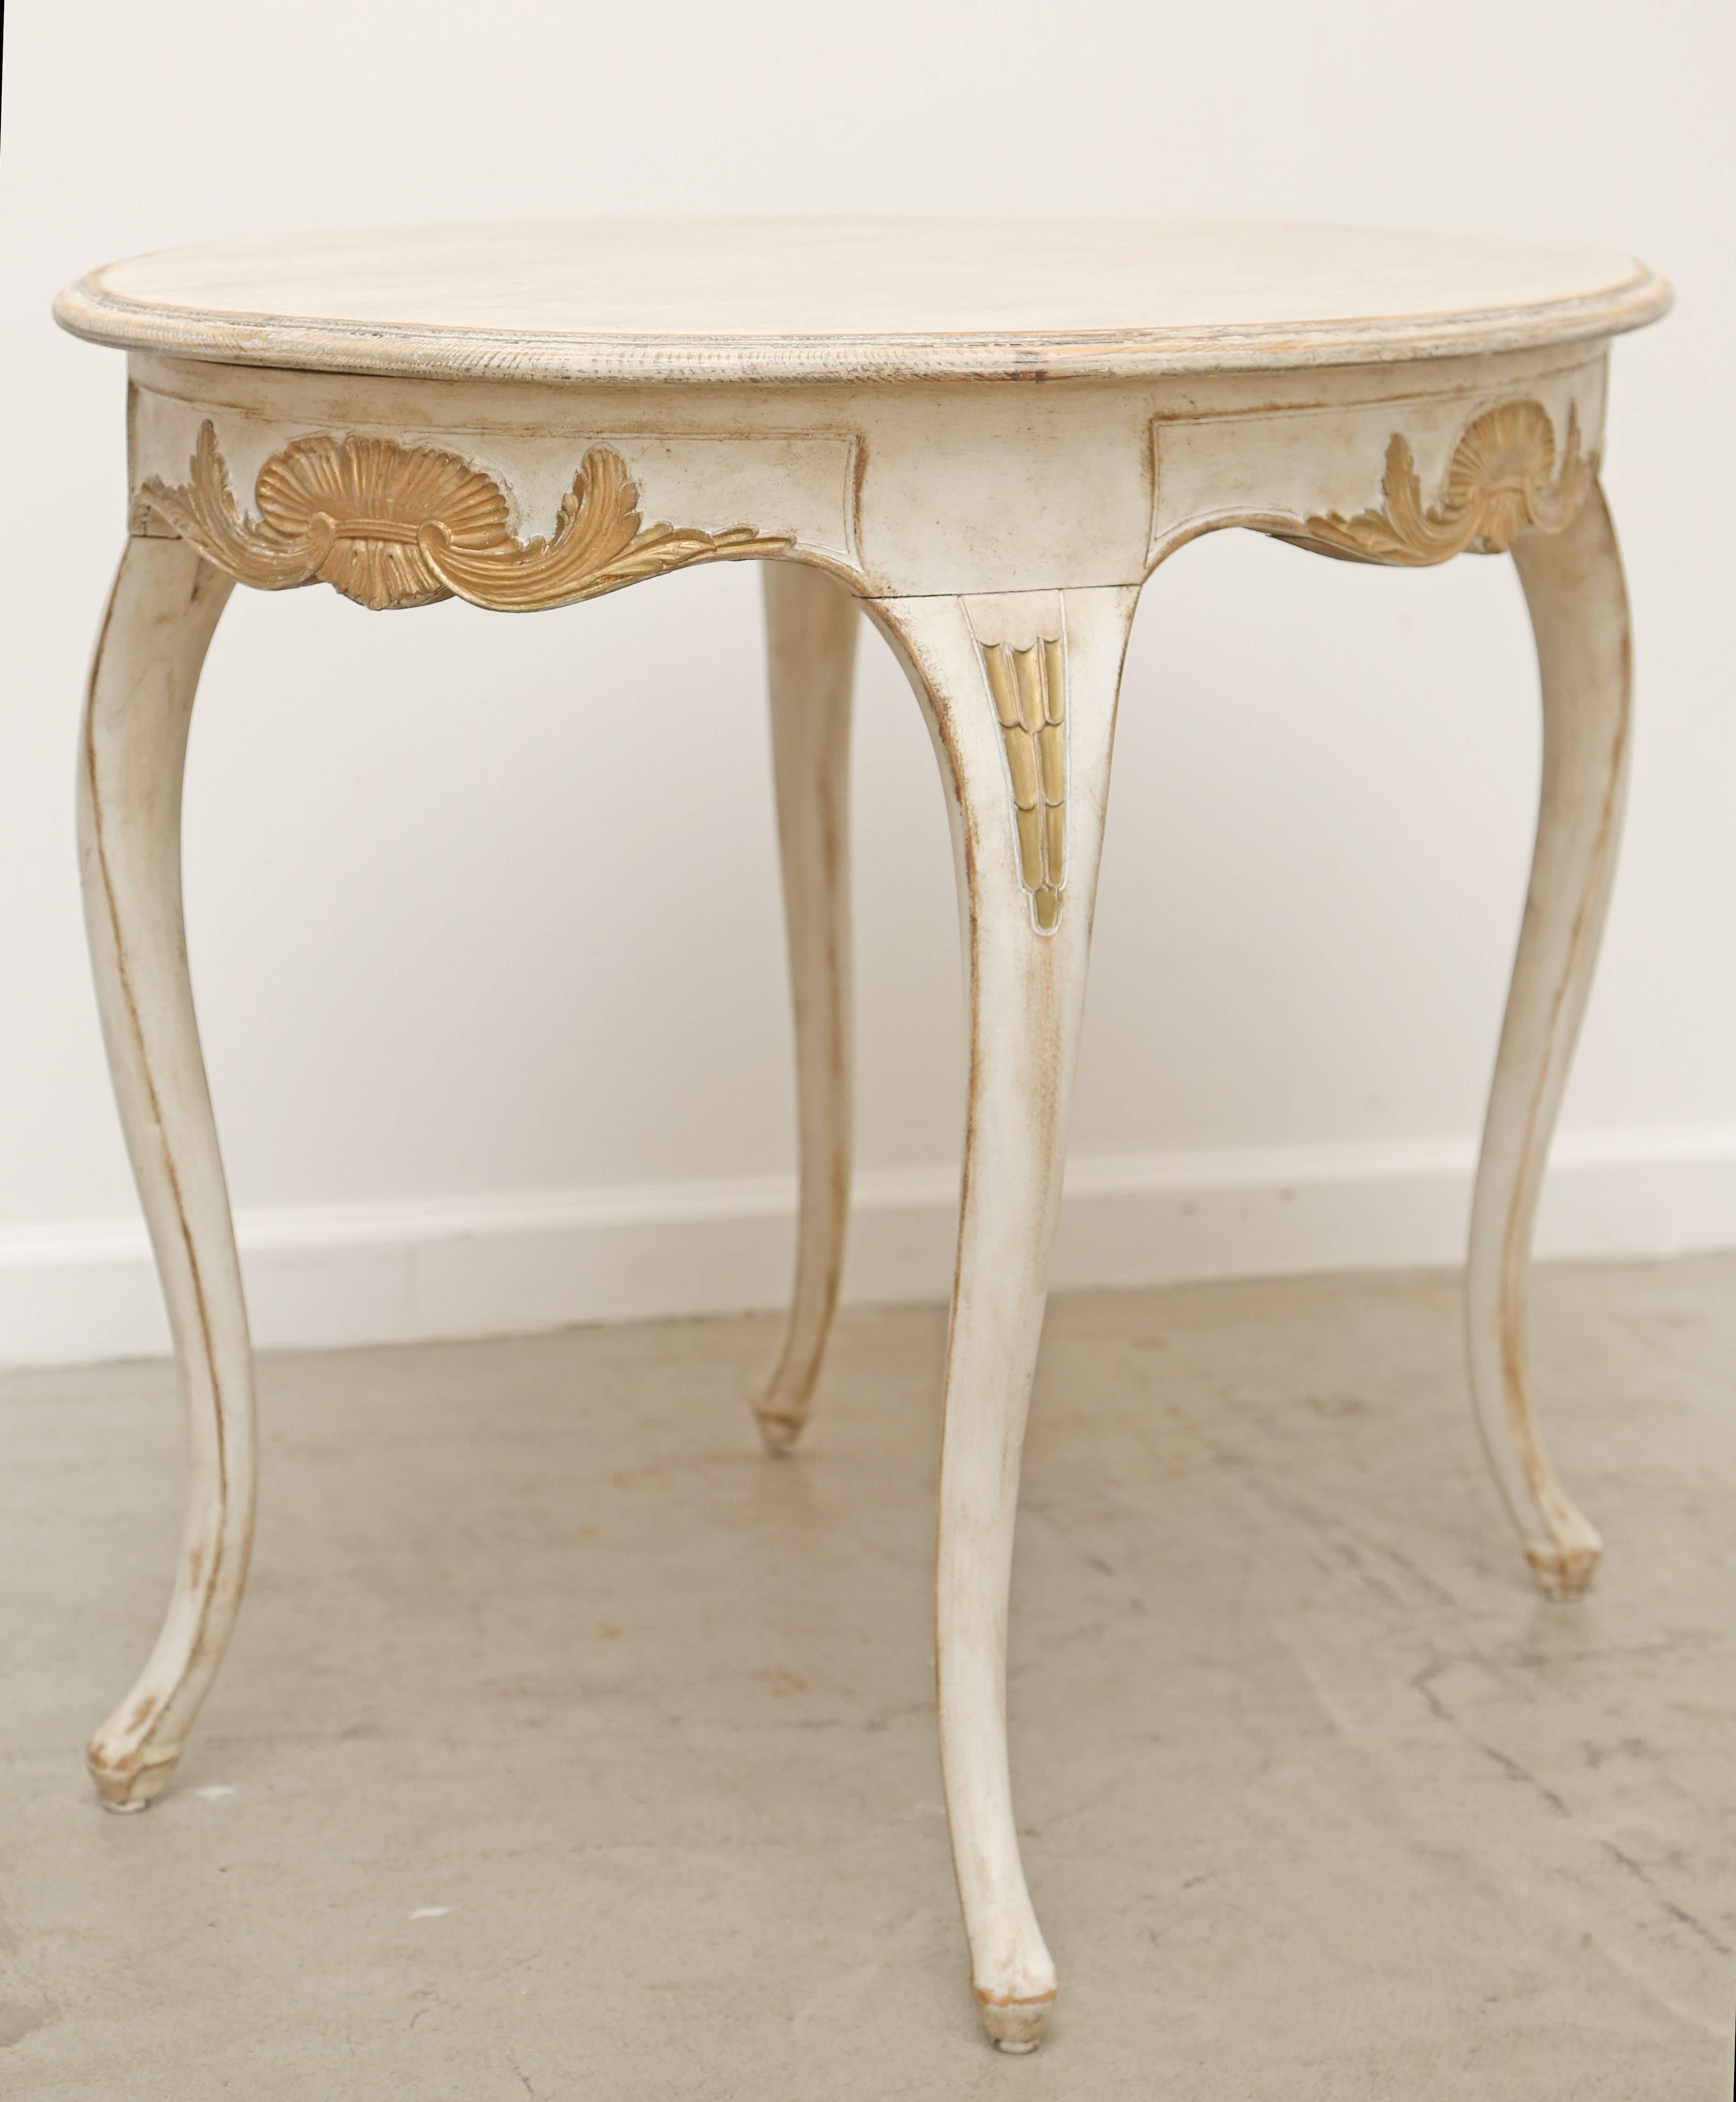 Wood Antique Swedish Rococo Carved Oval Table Gold Leaf Details, Late 18th Century